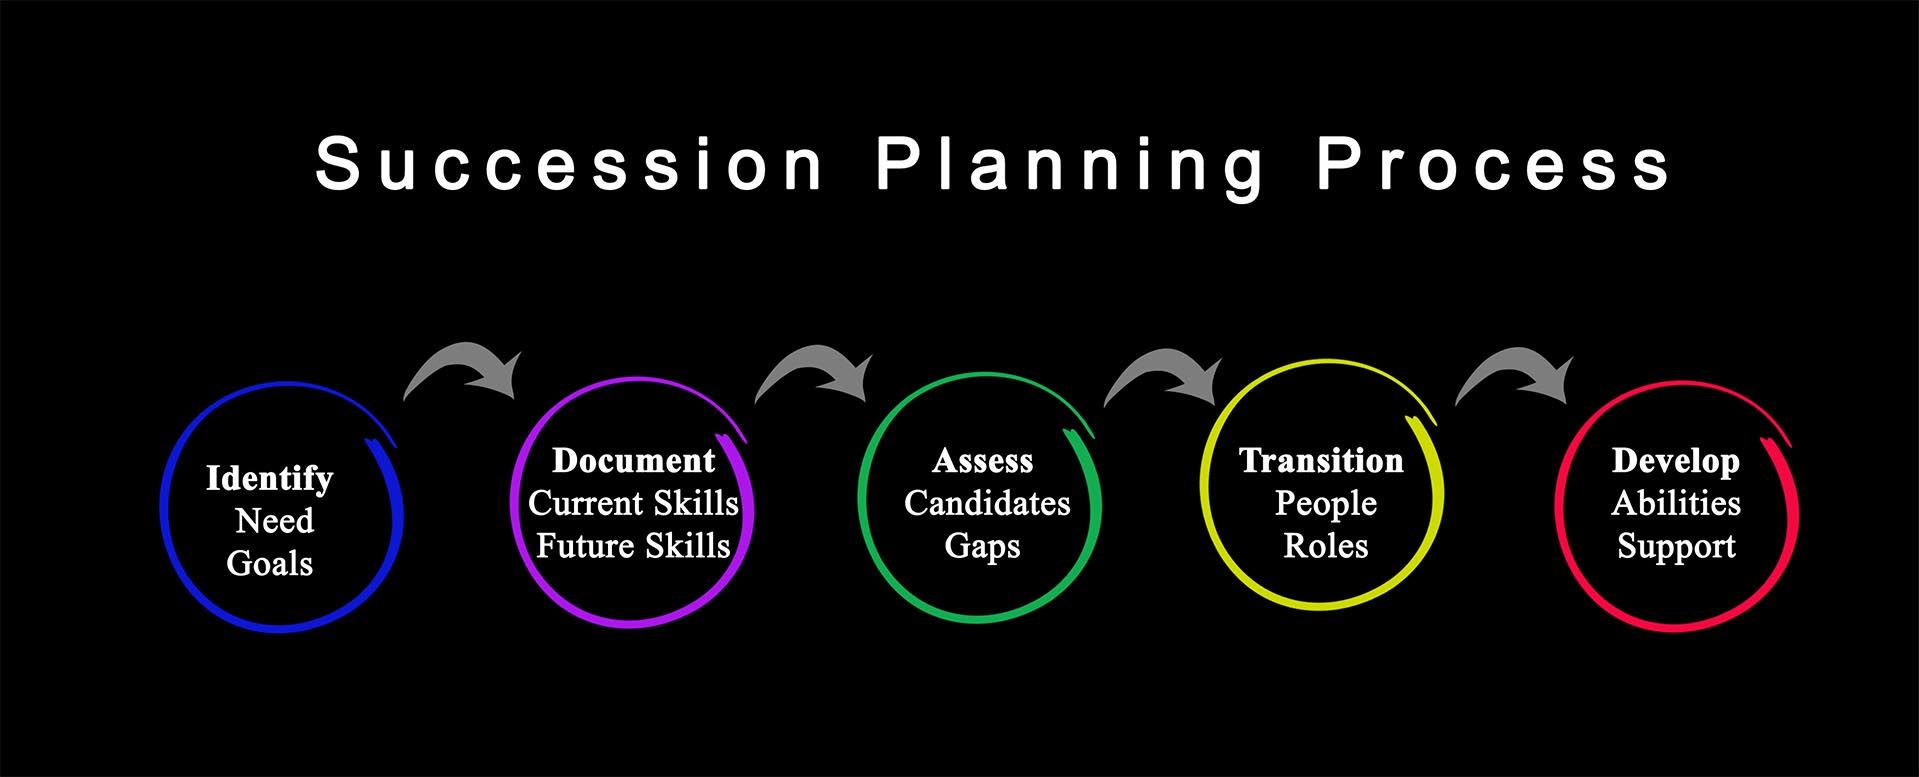 Improve HR with a succession planning process